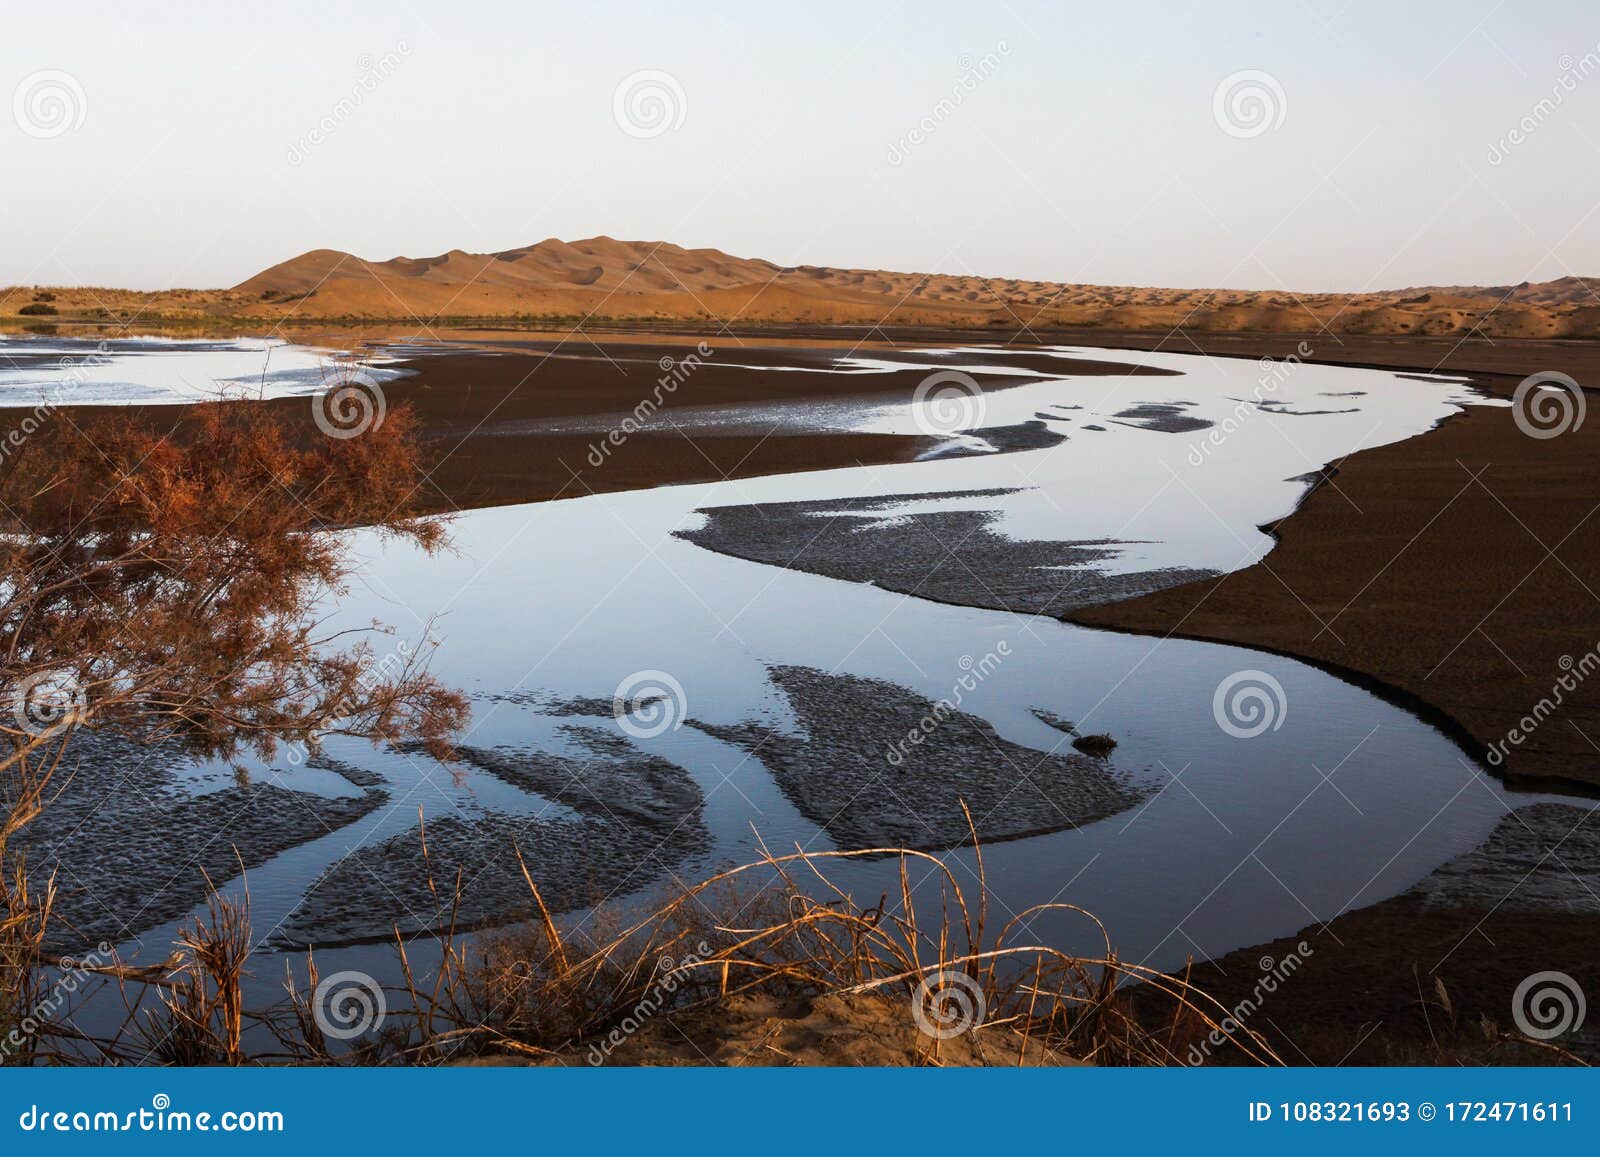 The Branch Of The River In The Desert Stock Image Image Of Vast Shortage